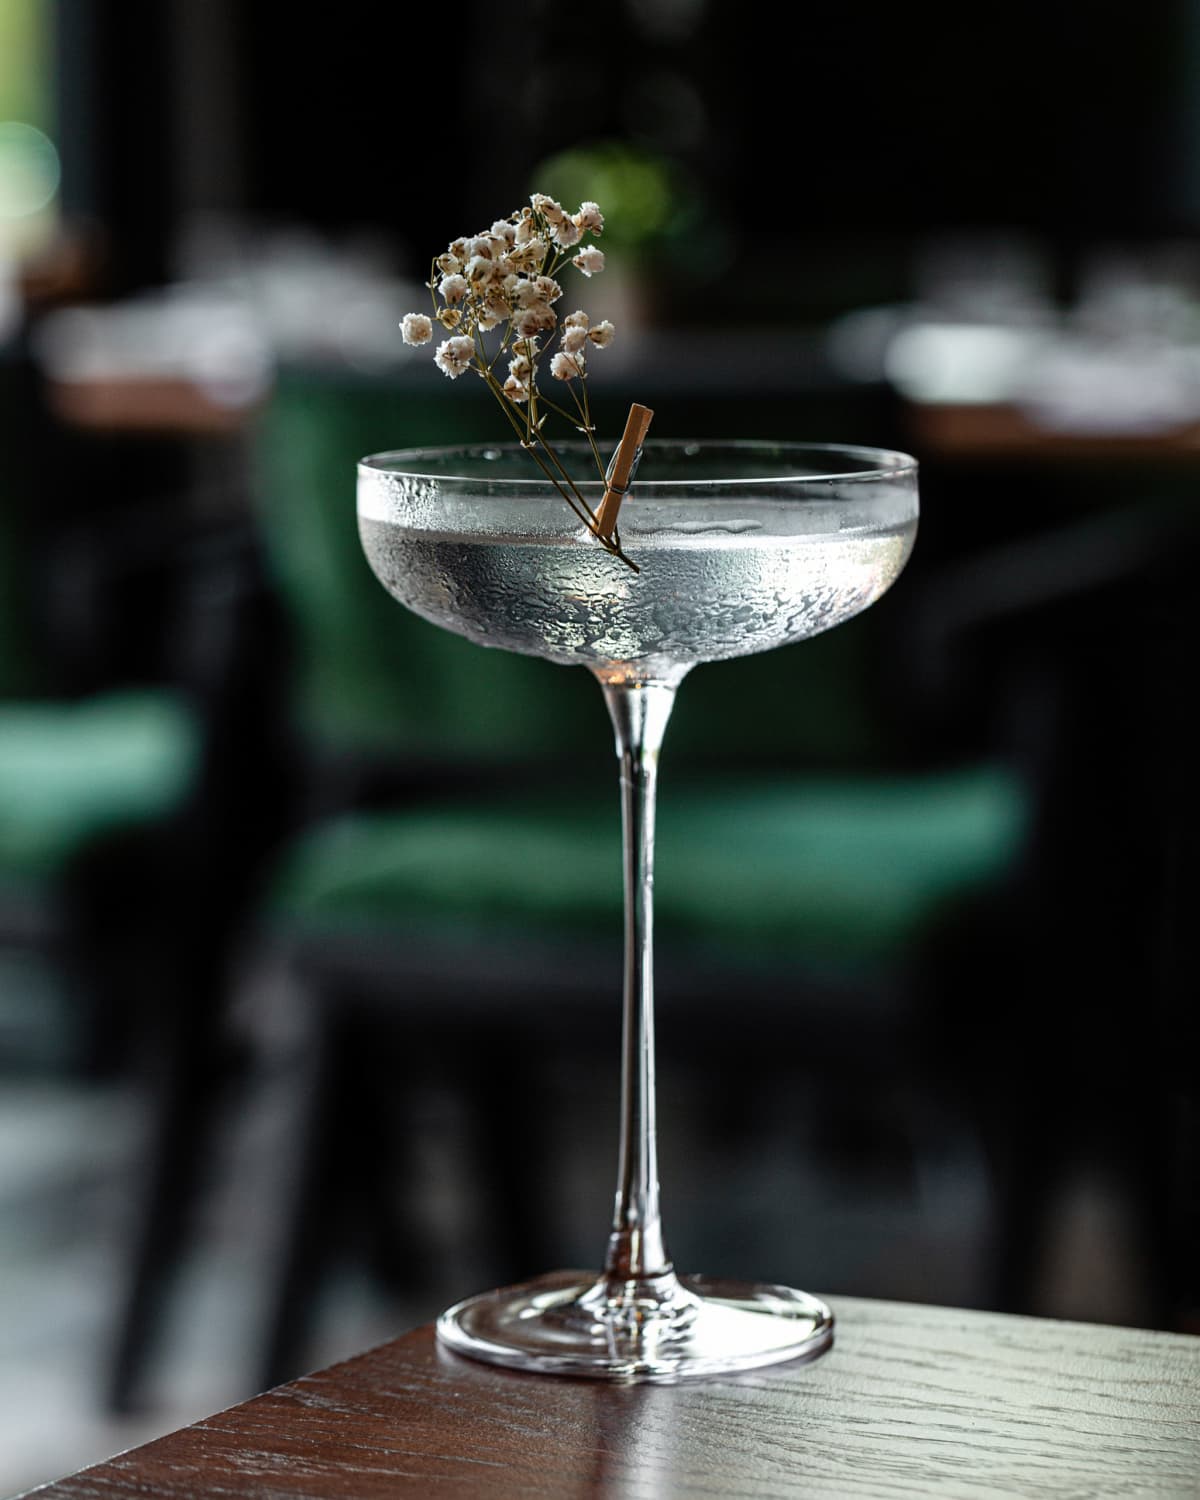 A cocktail in a martini glass with a flower garnish